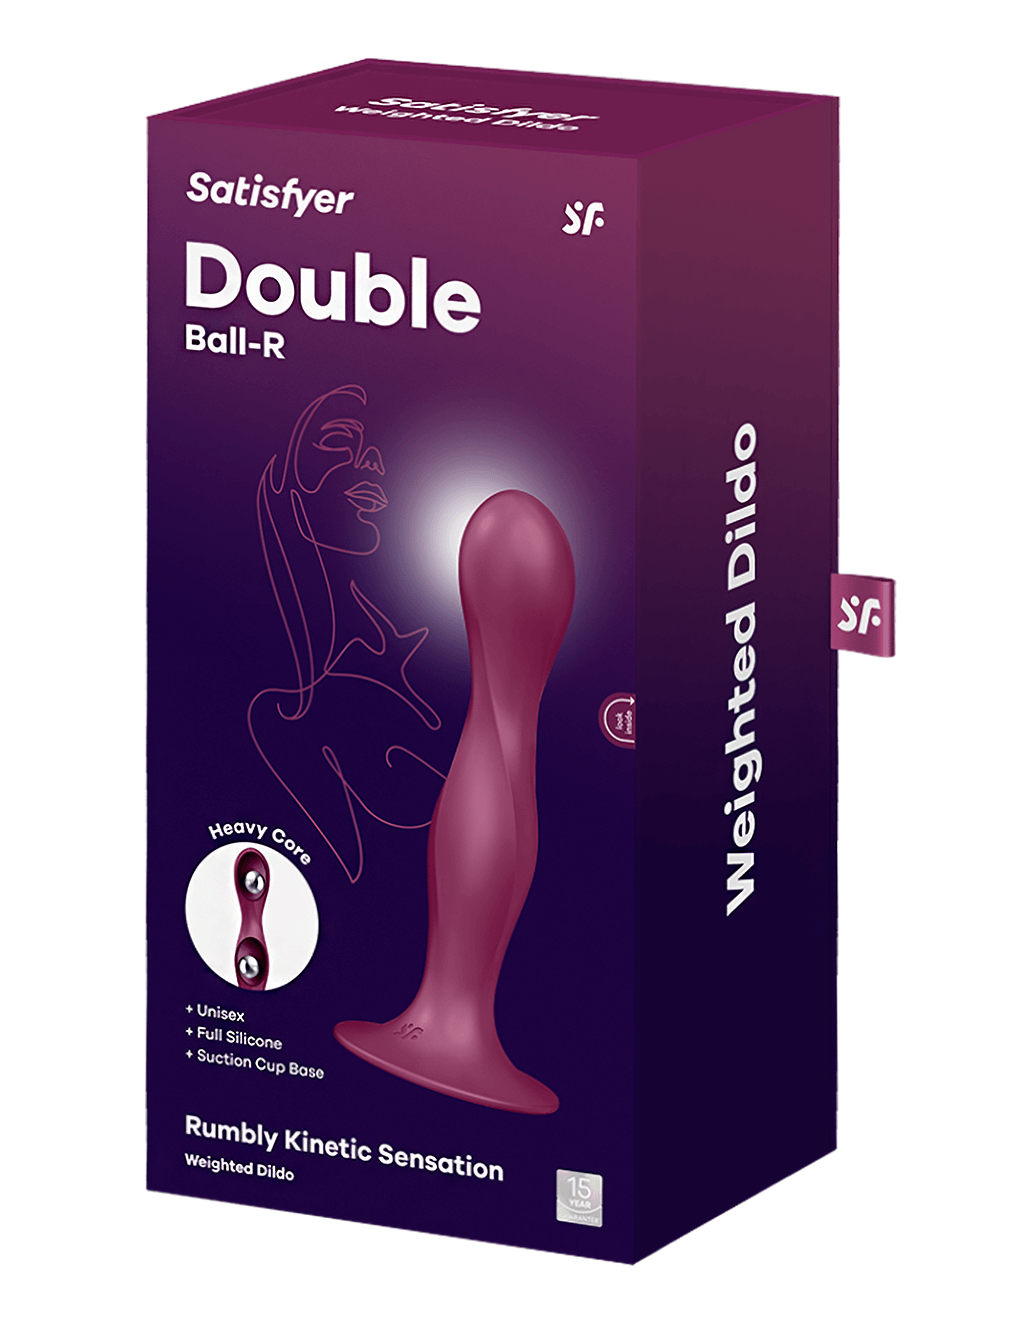 Satisfyer Double Ball-R - Red - Box